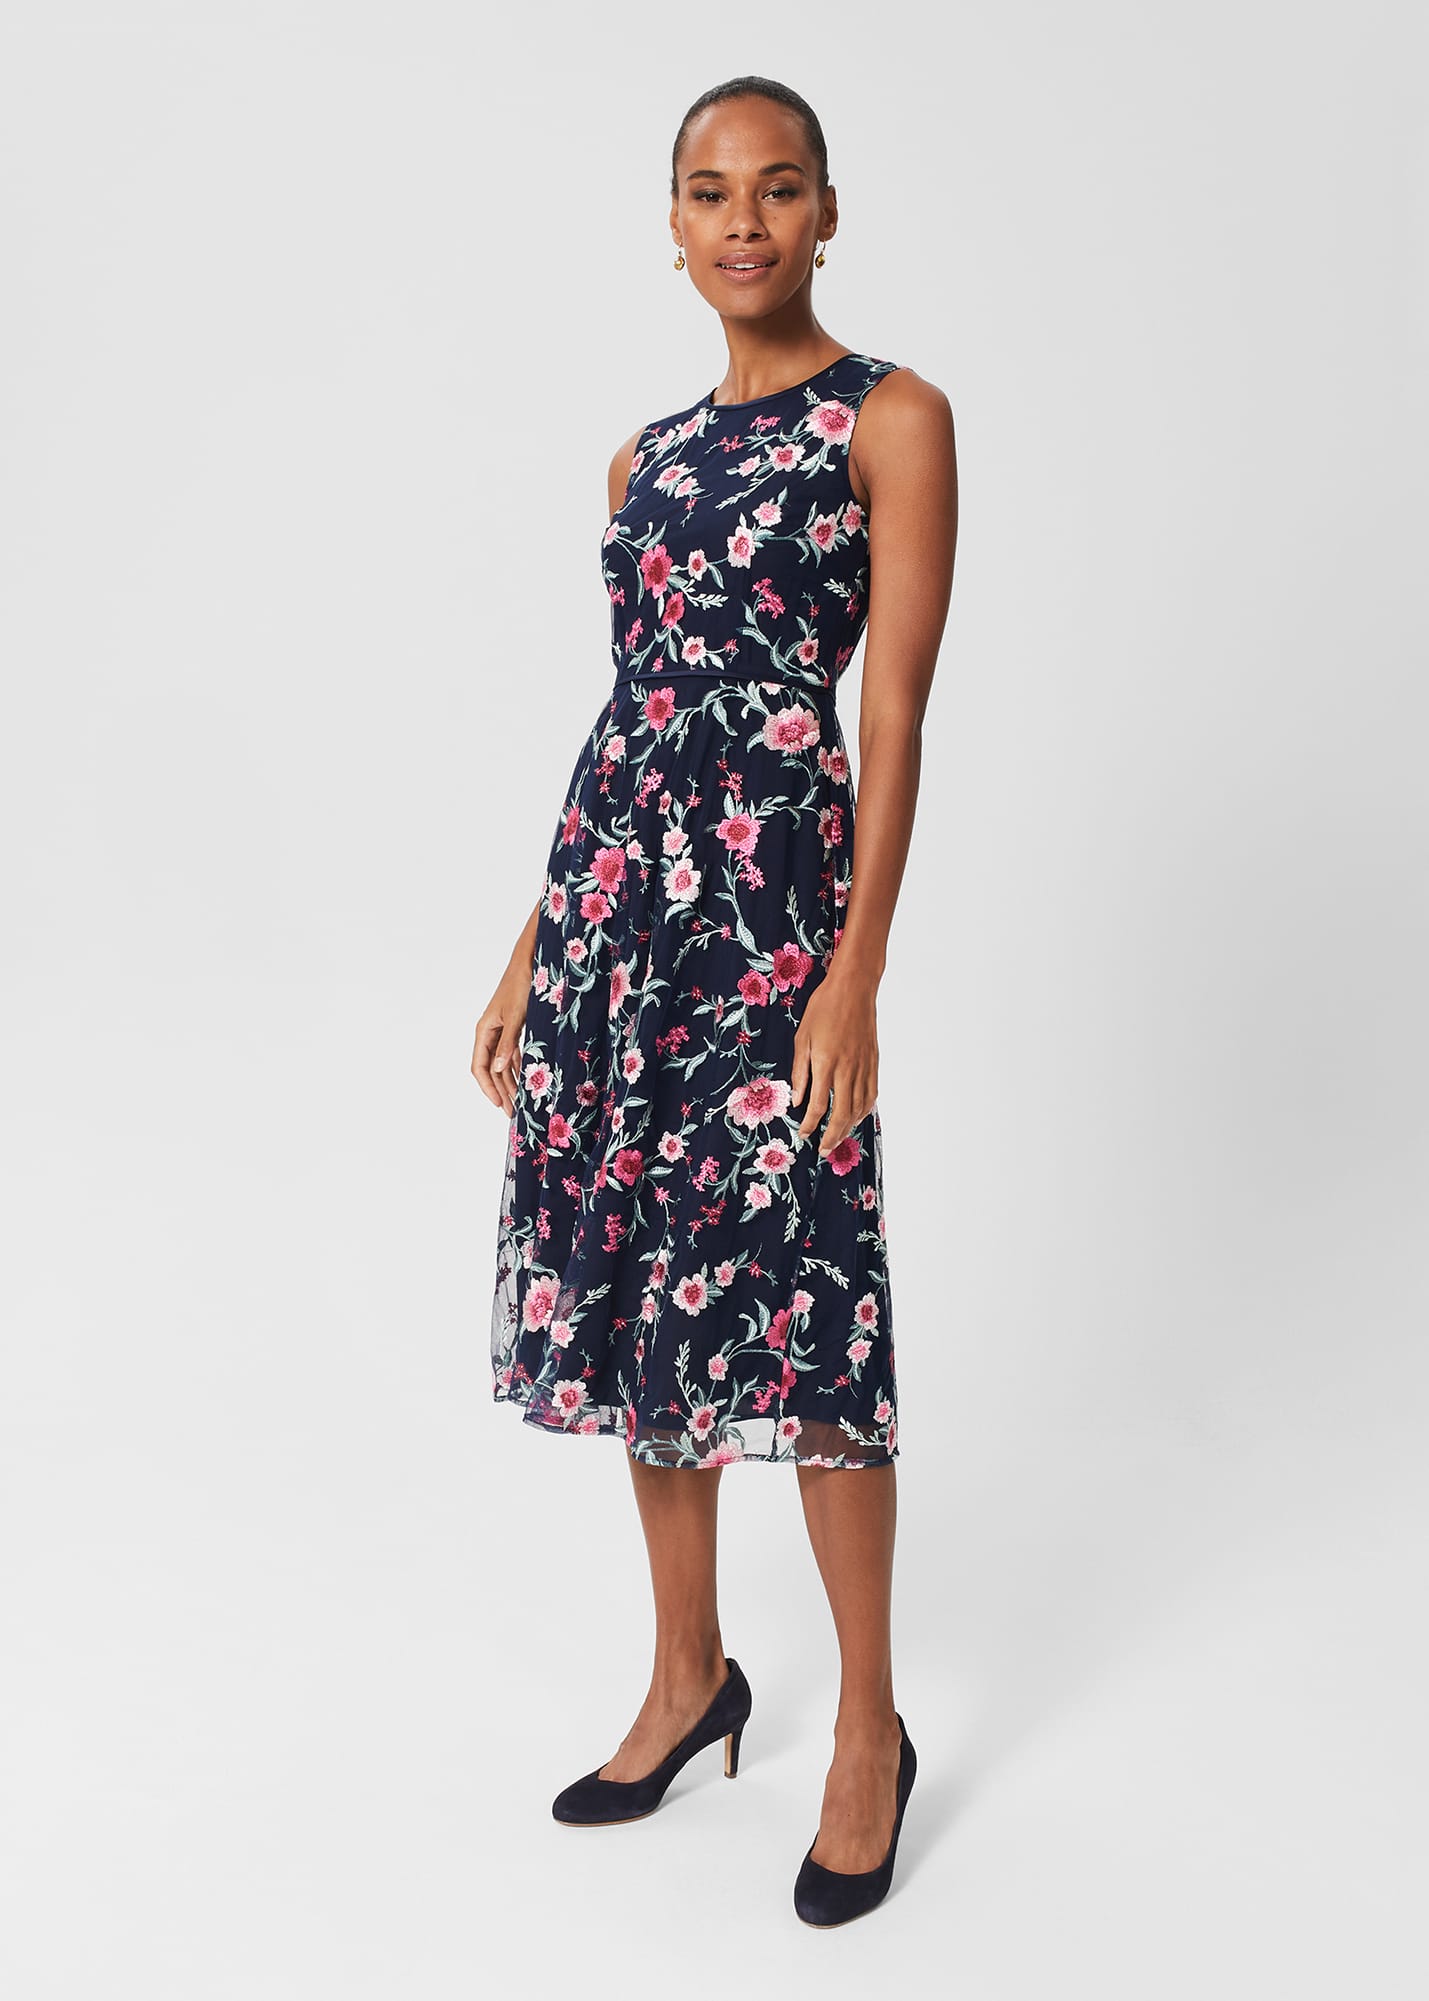 Hobbs Women's Rosella Embroidered Floral Dress - Navy Pink Multi